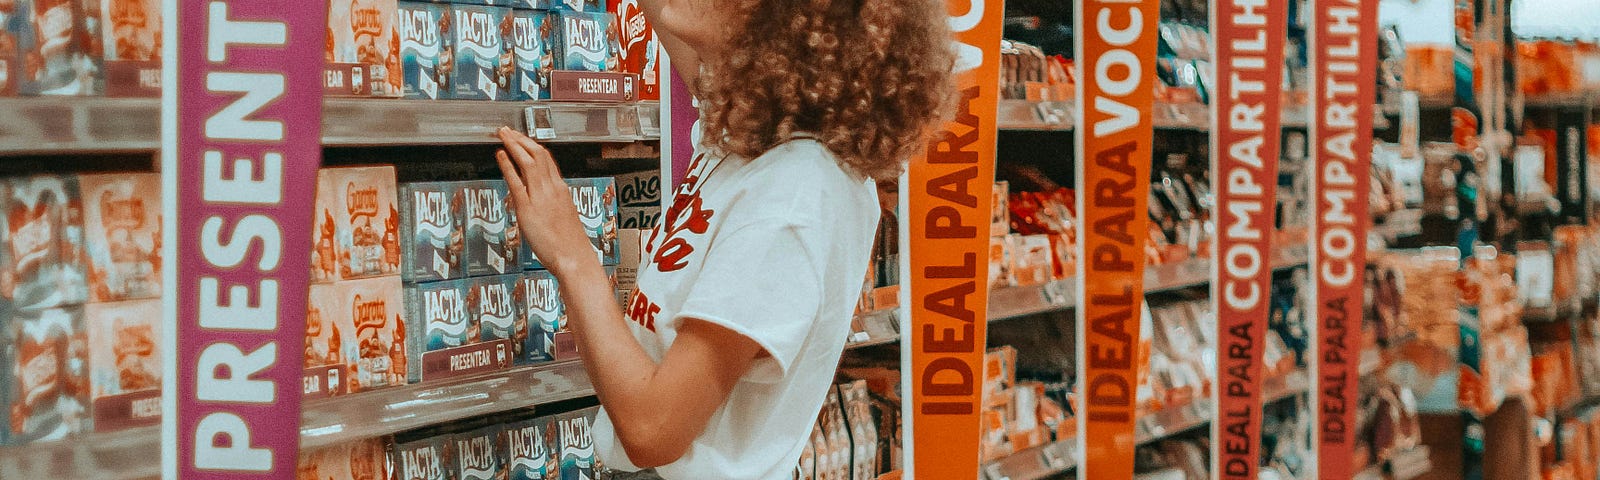 A lady with curly hair reaches to a high shelf to choose her product.